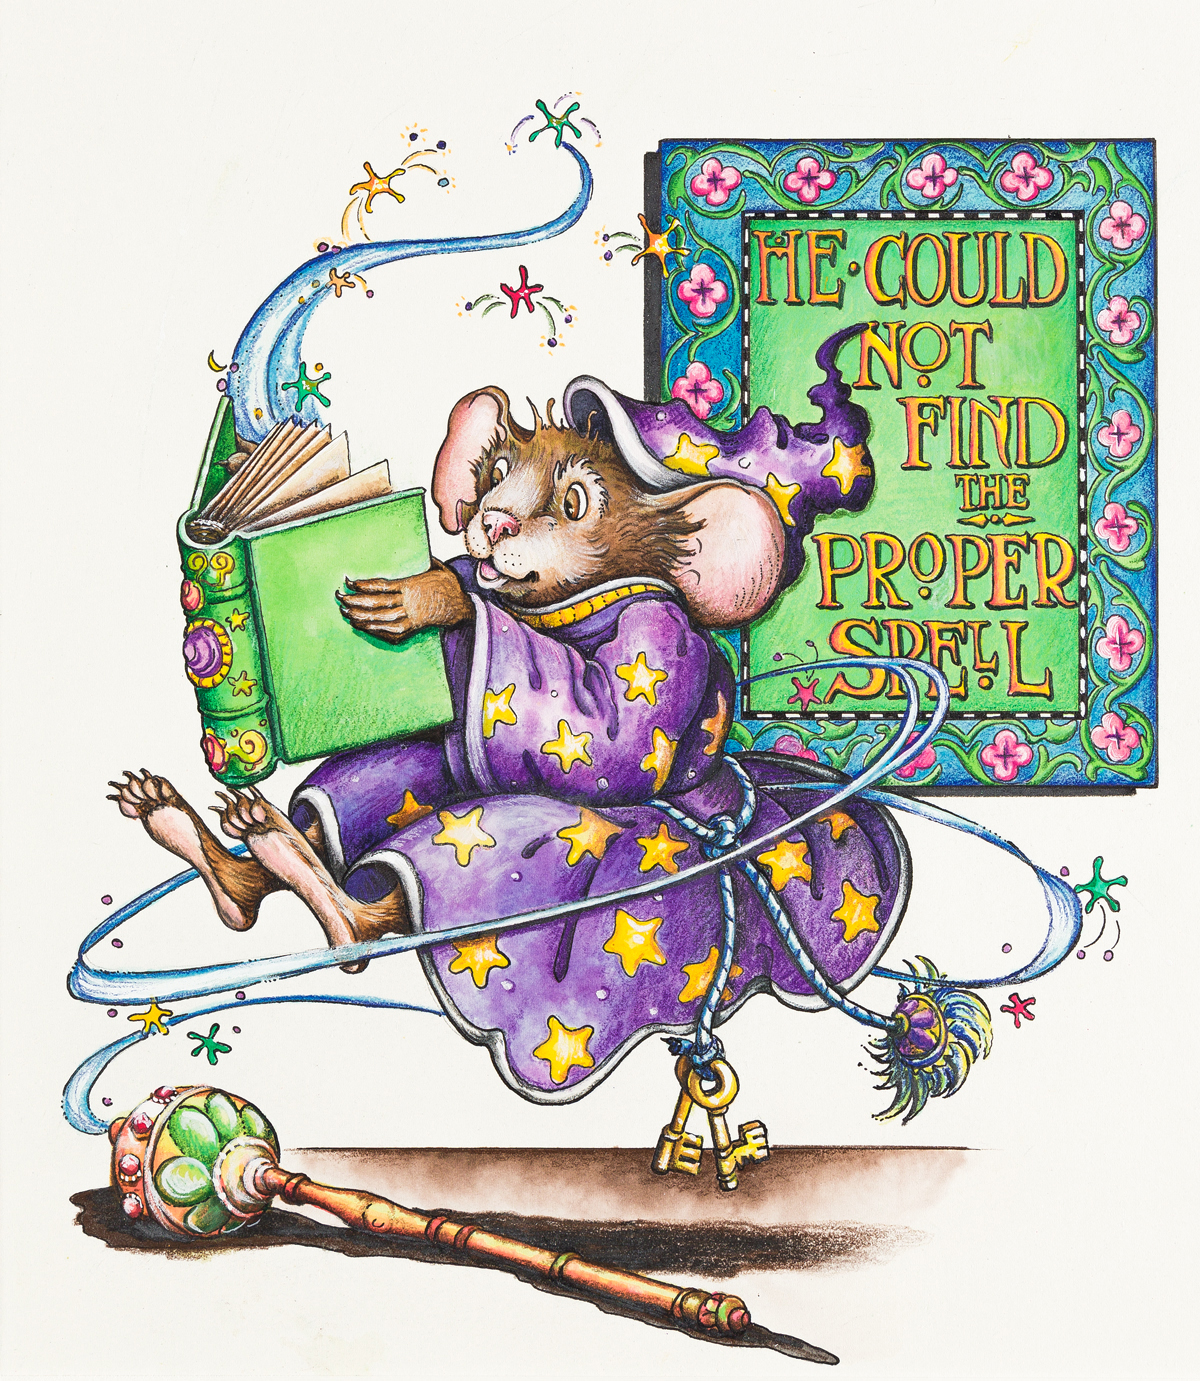 KATHY MITCHELL (20th Century) He Could Not Find the Proper Spell. [CHILDRENS / MOUSE]